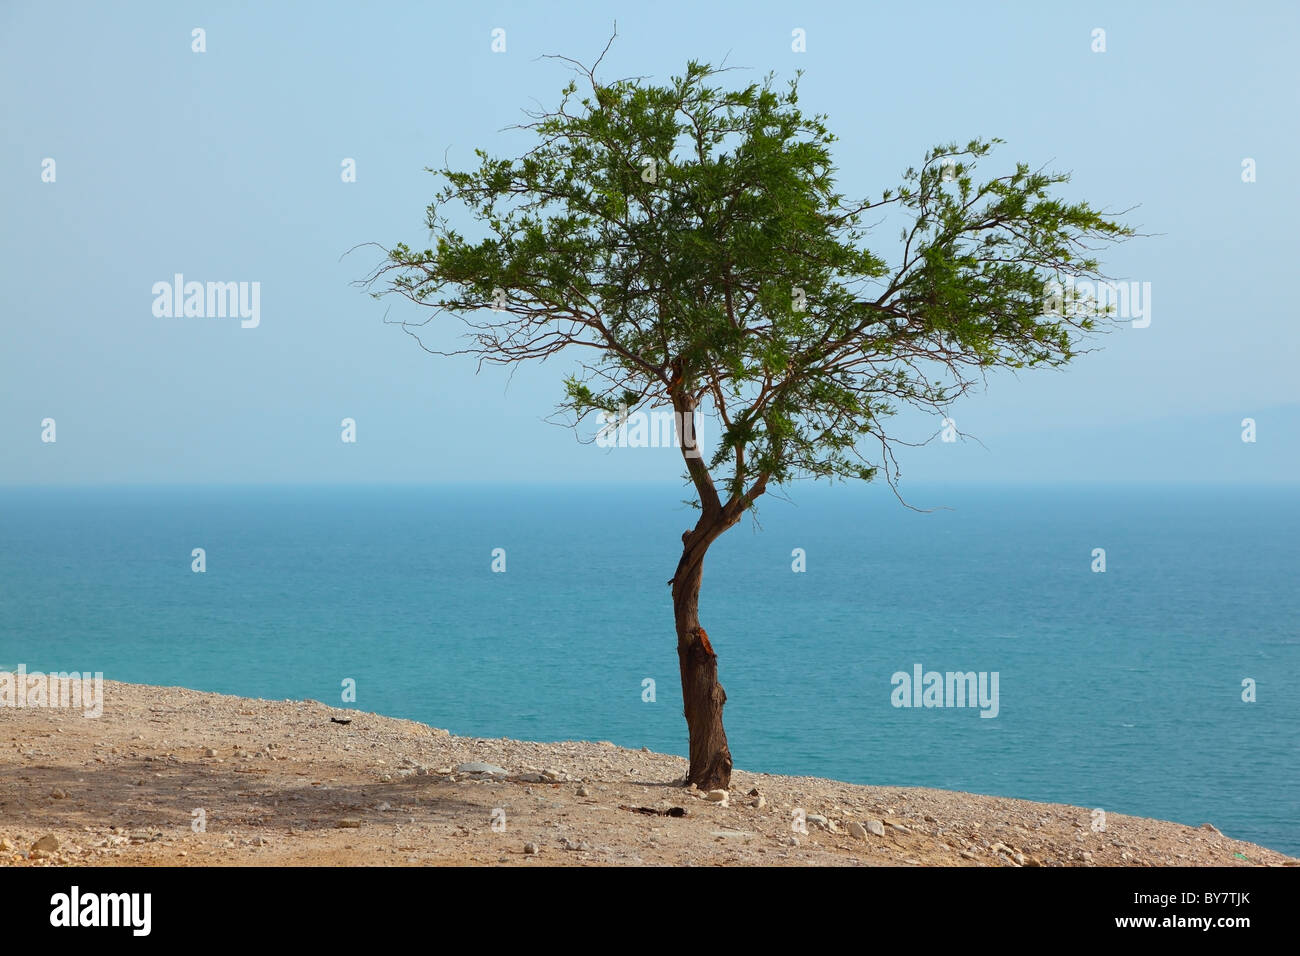 Picturesque tree on dry cliff above the Dead Sea Stock Photo